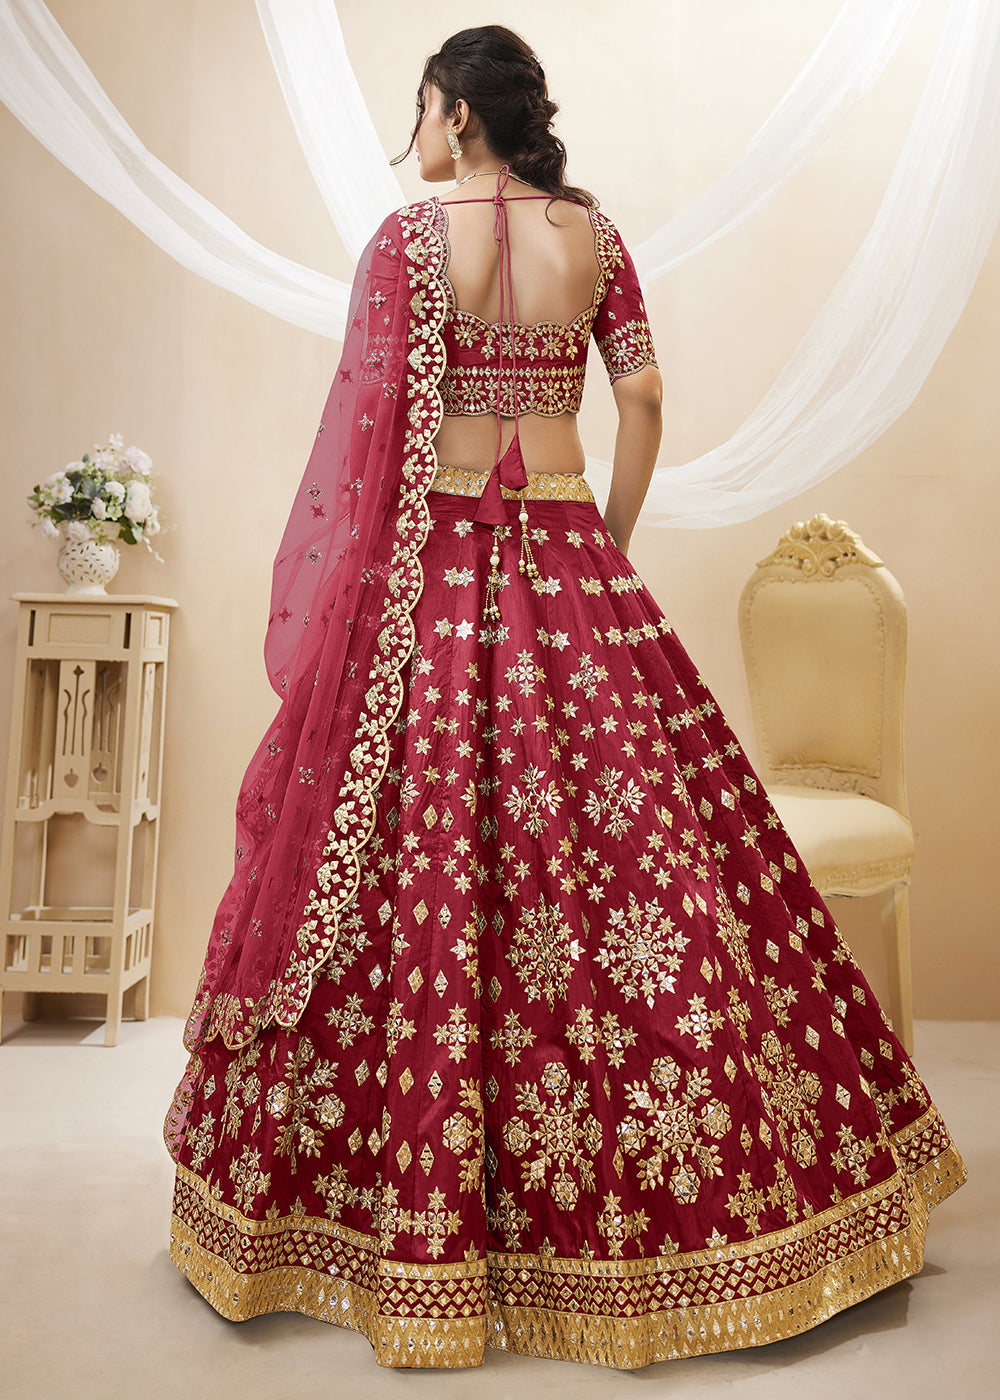 Buy Now Marvelous Red Art Silk Embroidered Reception Wear Lehenga Choli Online in USA, UK, Canada & Worldwide at Empress Clothing.